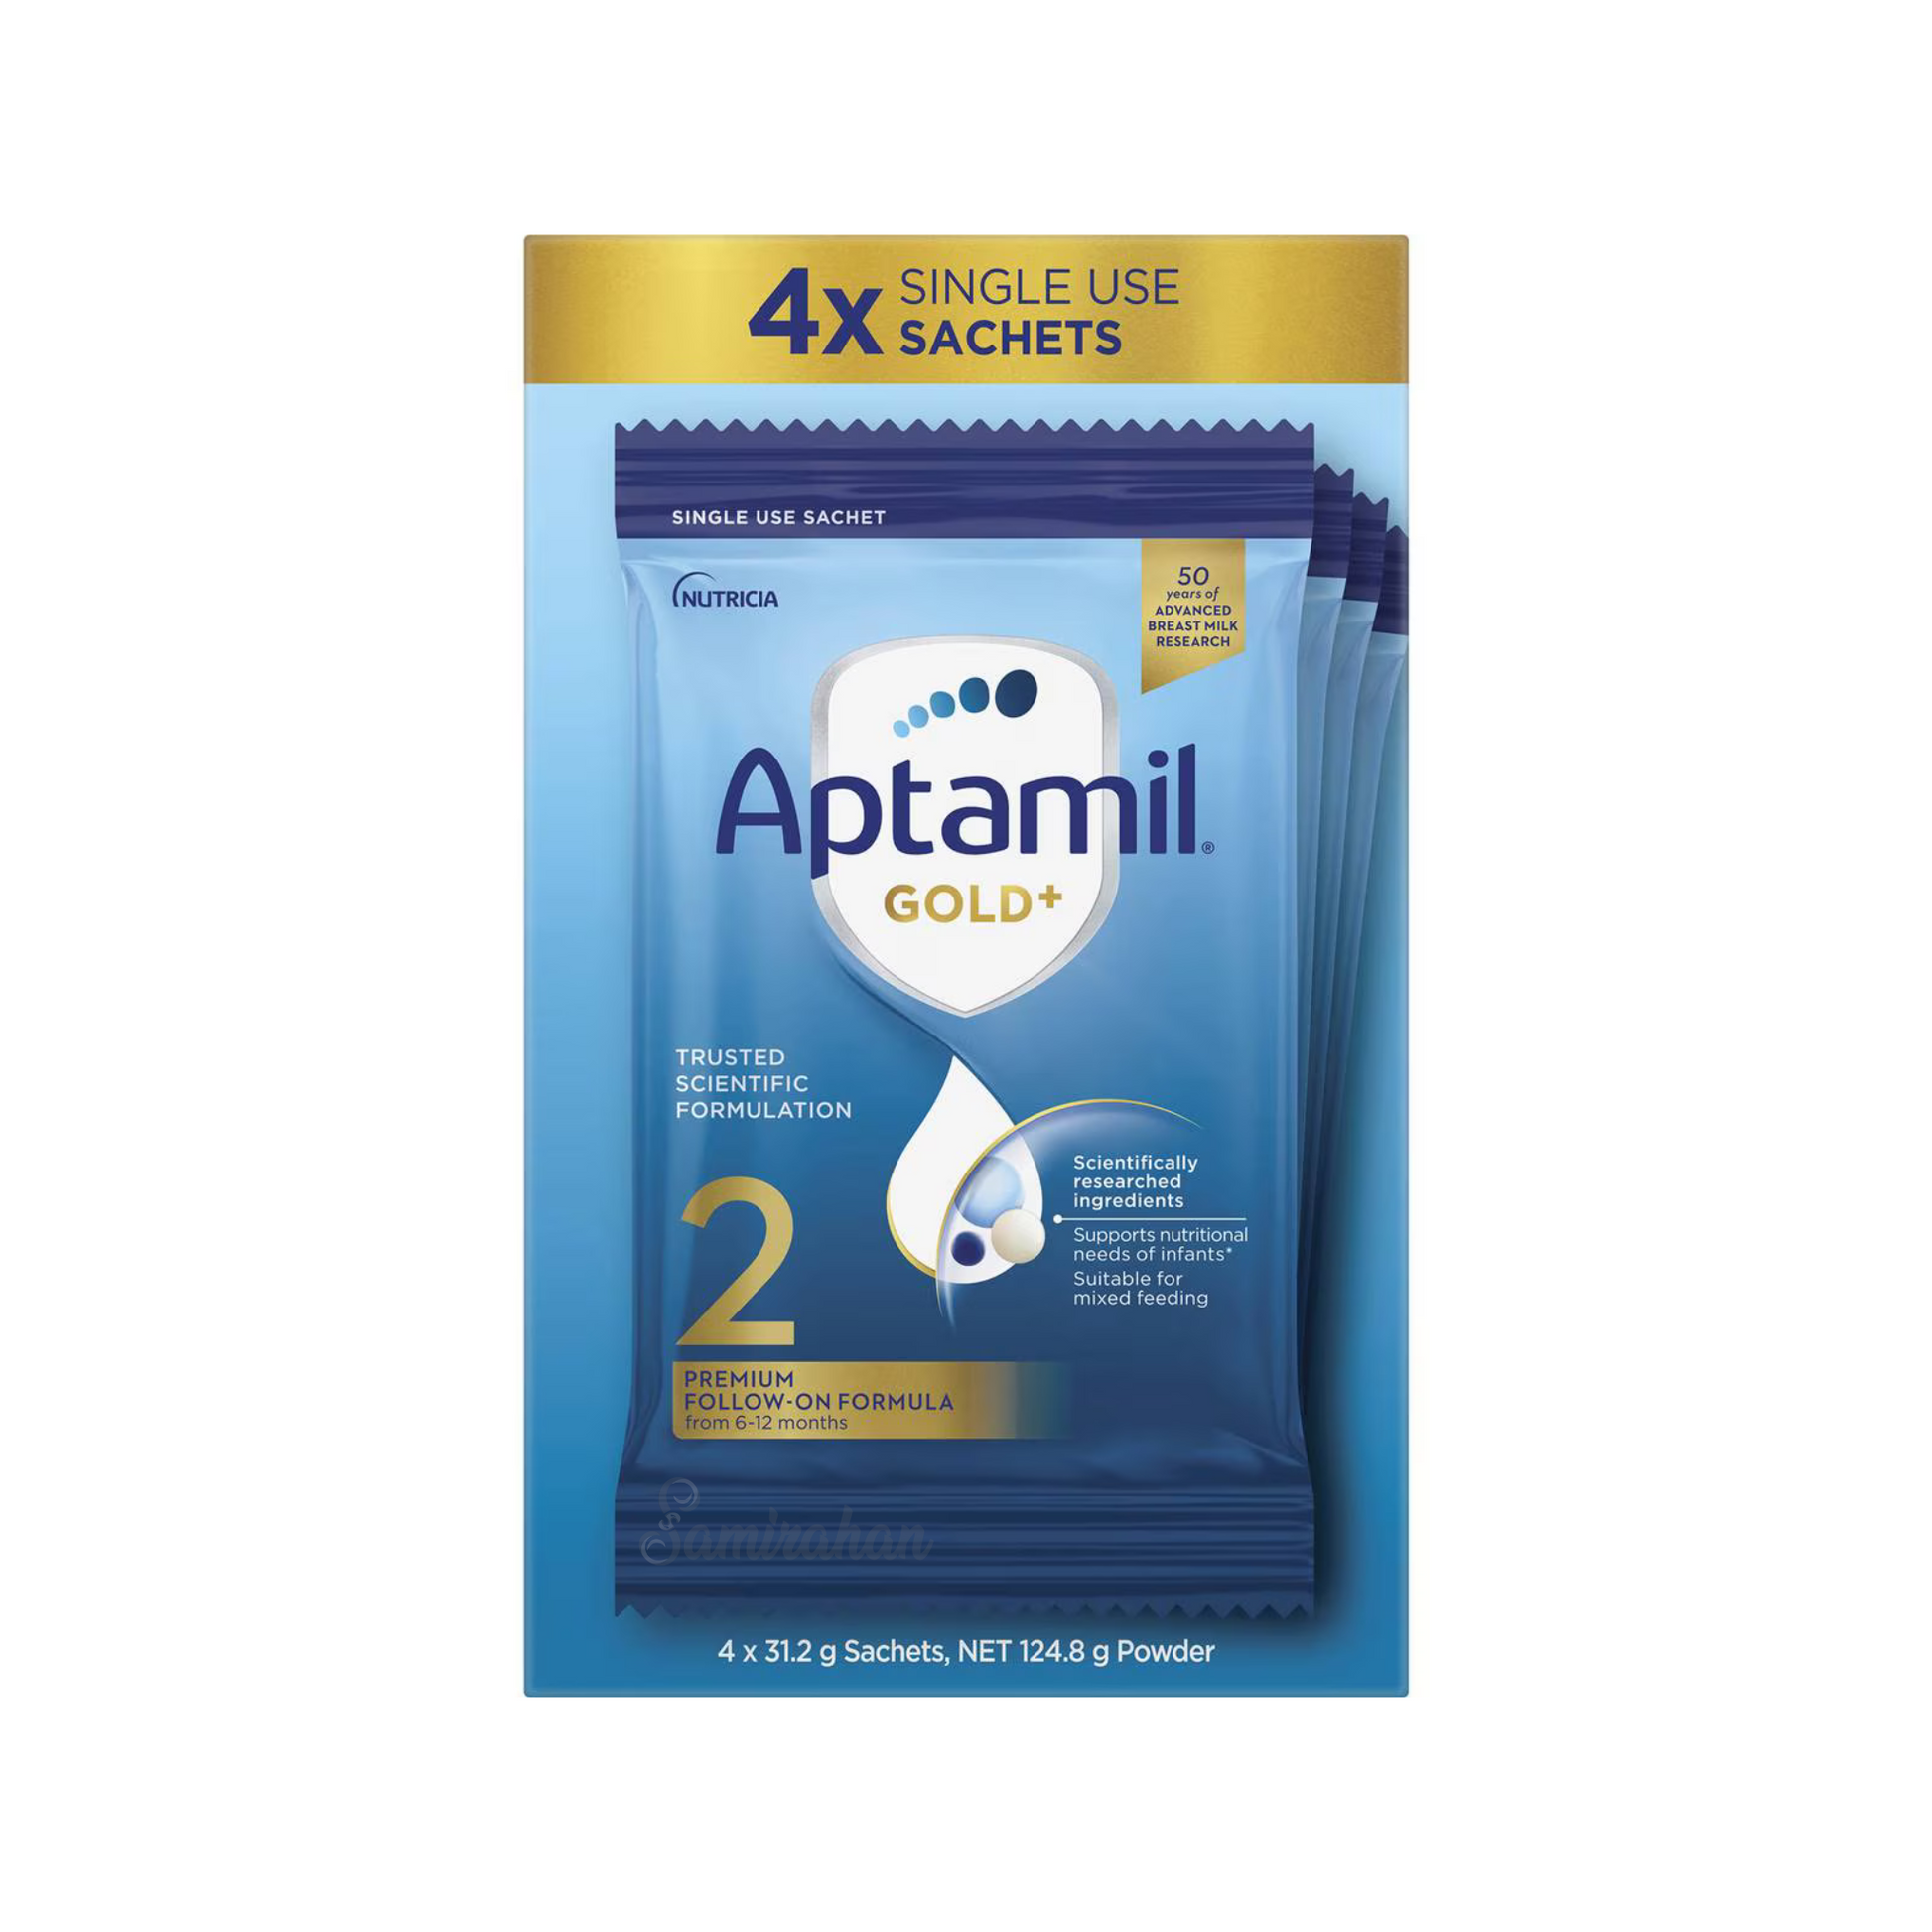 Aptamil Gold+ Stage 2 Follow-on Formula Sachets is a nutritionally complete premium baby milk powder, suitable for infants from 6 to 12 months. Halal vegetarian. Best imported genuine real authentic Australian New Zealand cow brand quality safe healthy feeding food nutrition cheap price in Dhaka Chittagong Bangladesh